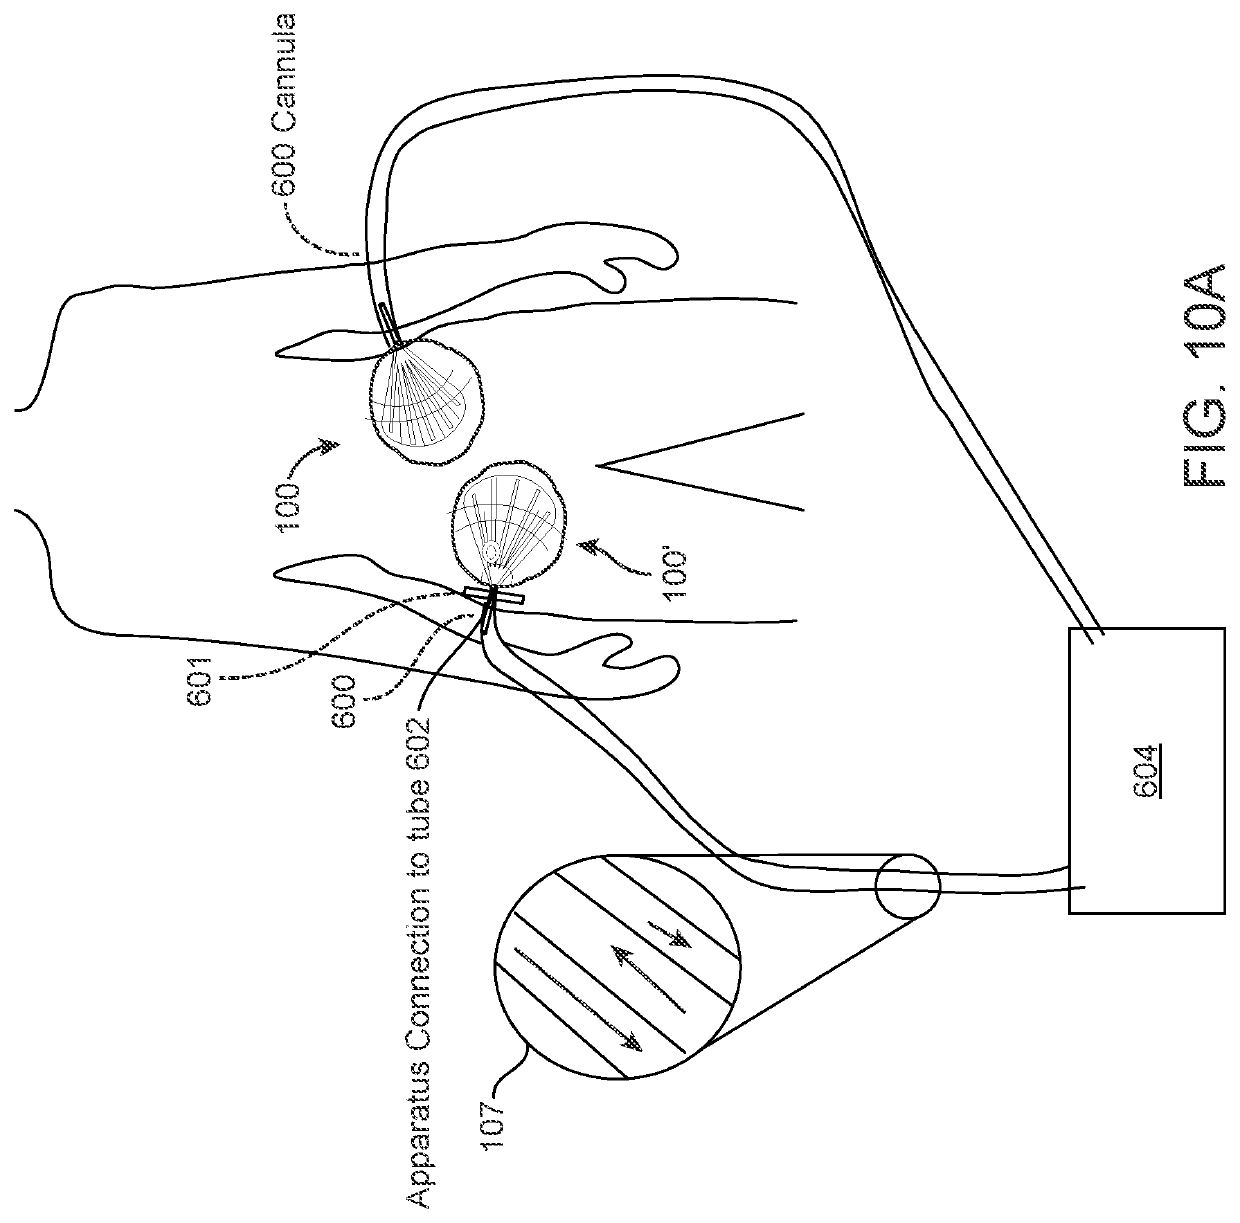 Apparatuses and methods for improving recovery from minimally invasive surgery